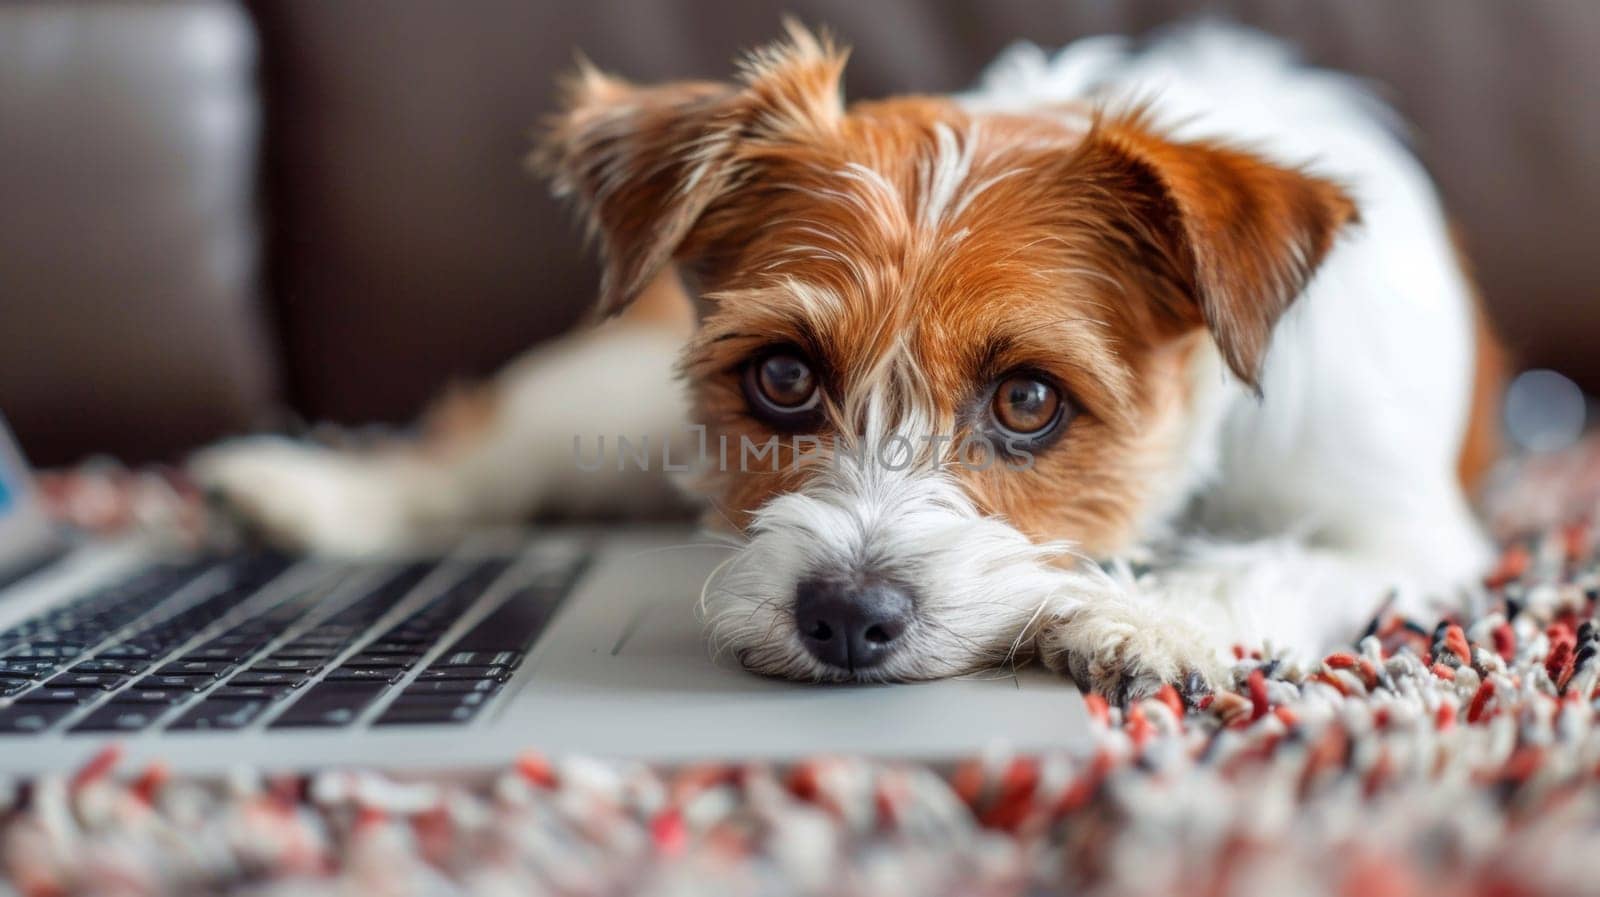 A small dog laying on a rug next to an open laptop, AI by starush